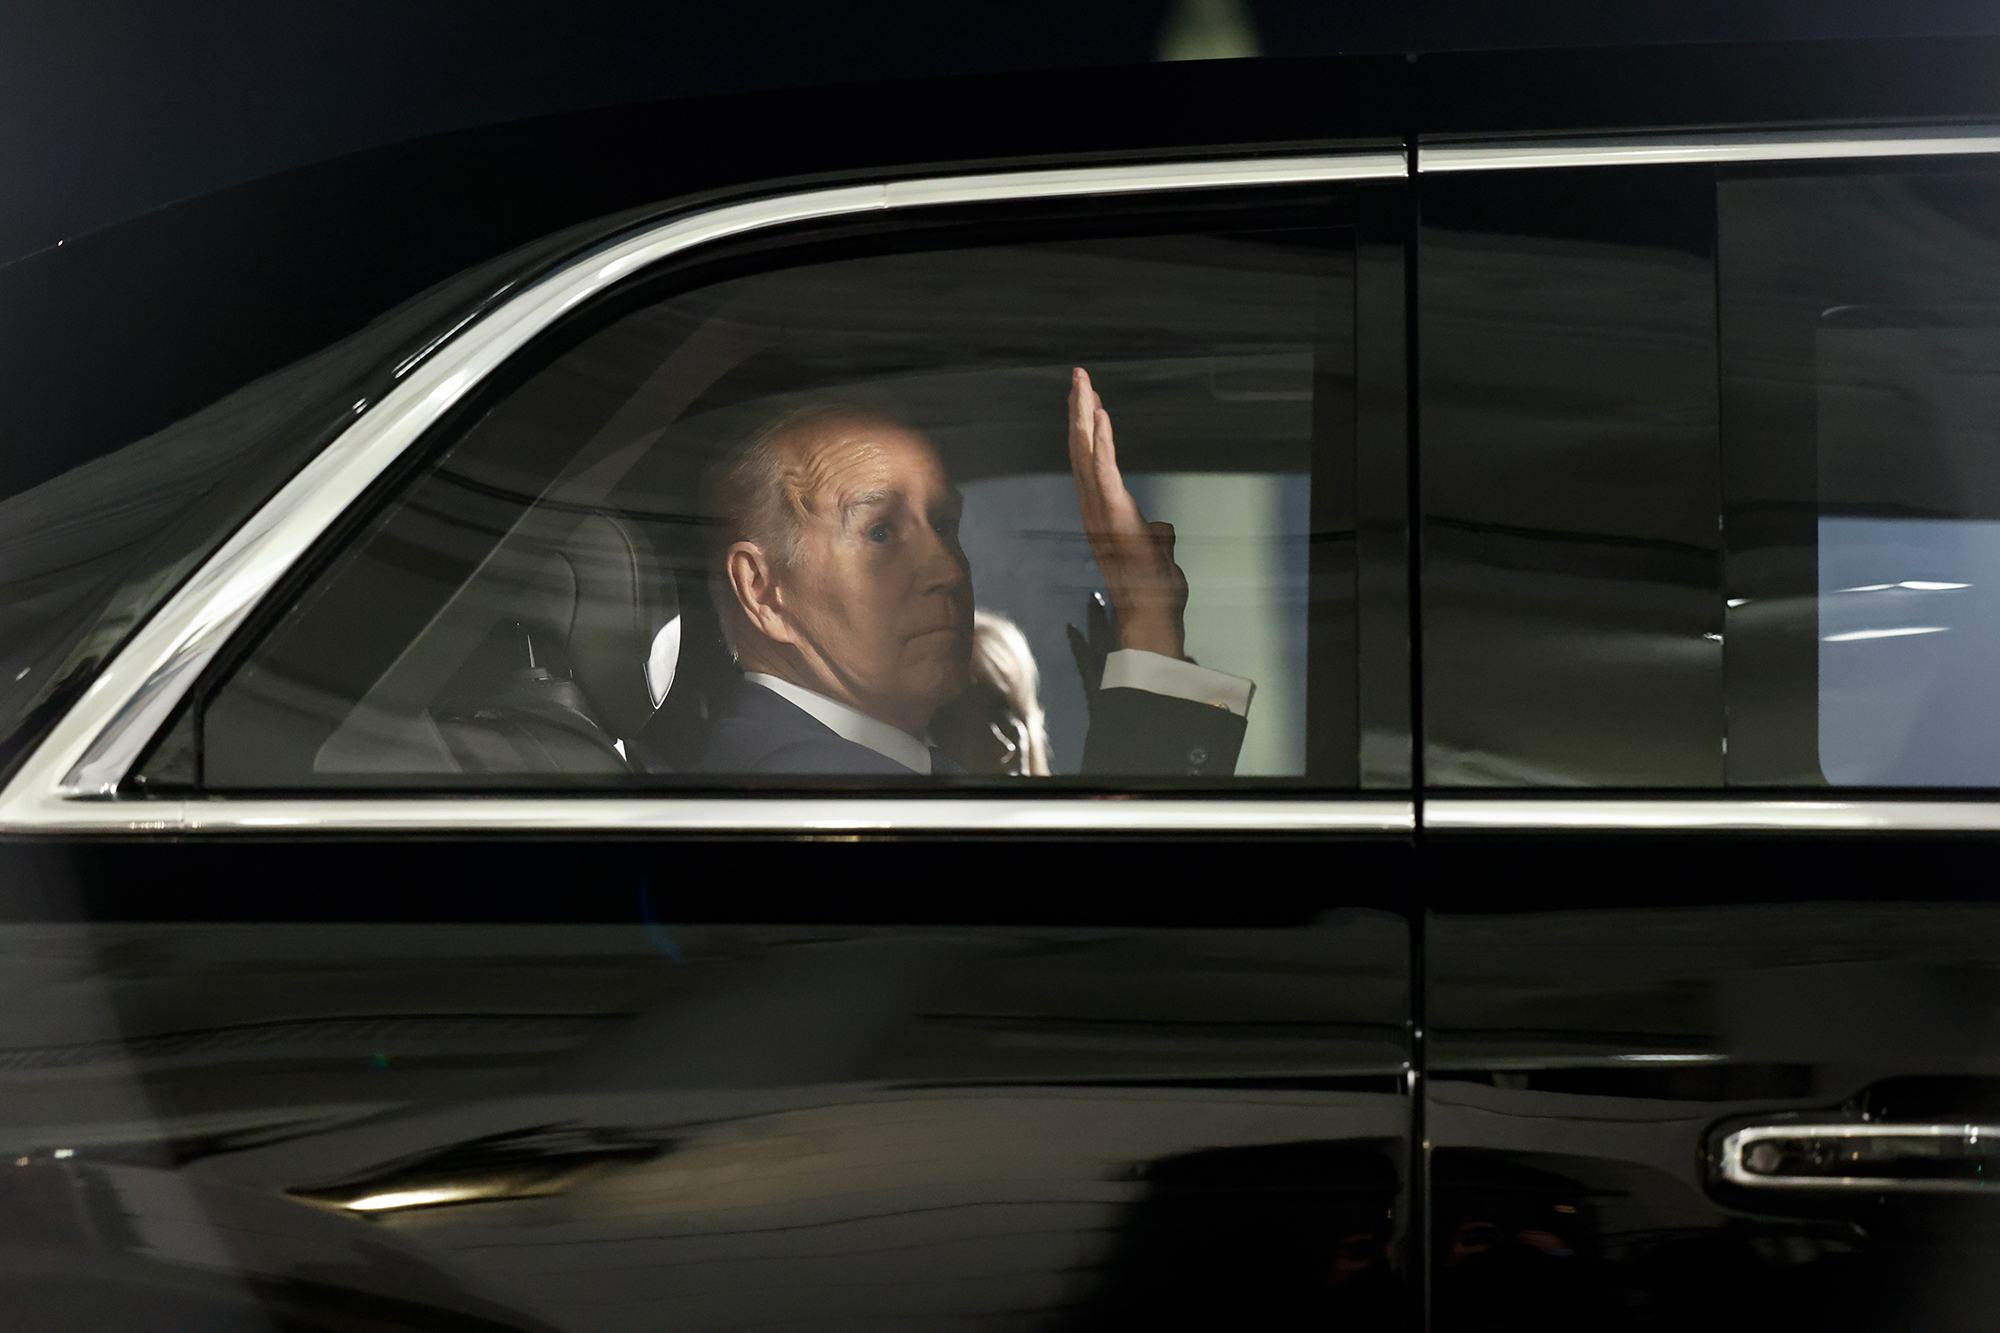 President Joe Biden departs the White House to deliver his State of the Union address at the US Capitol.